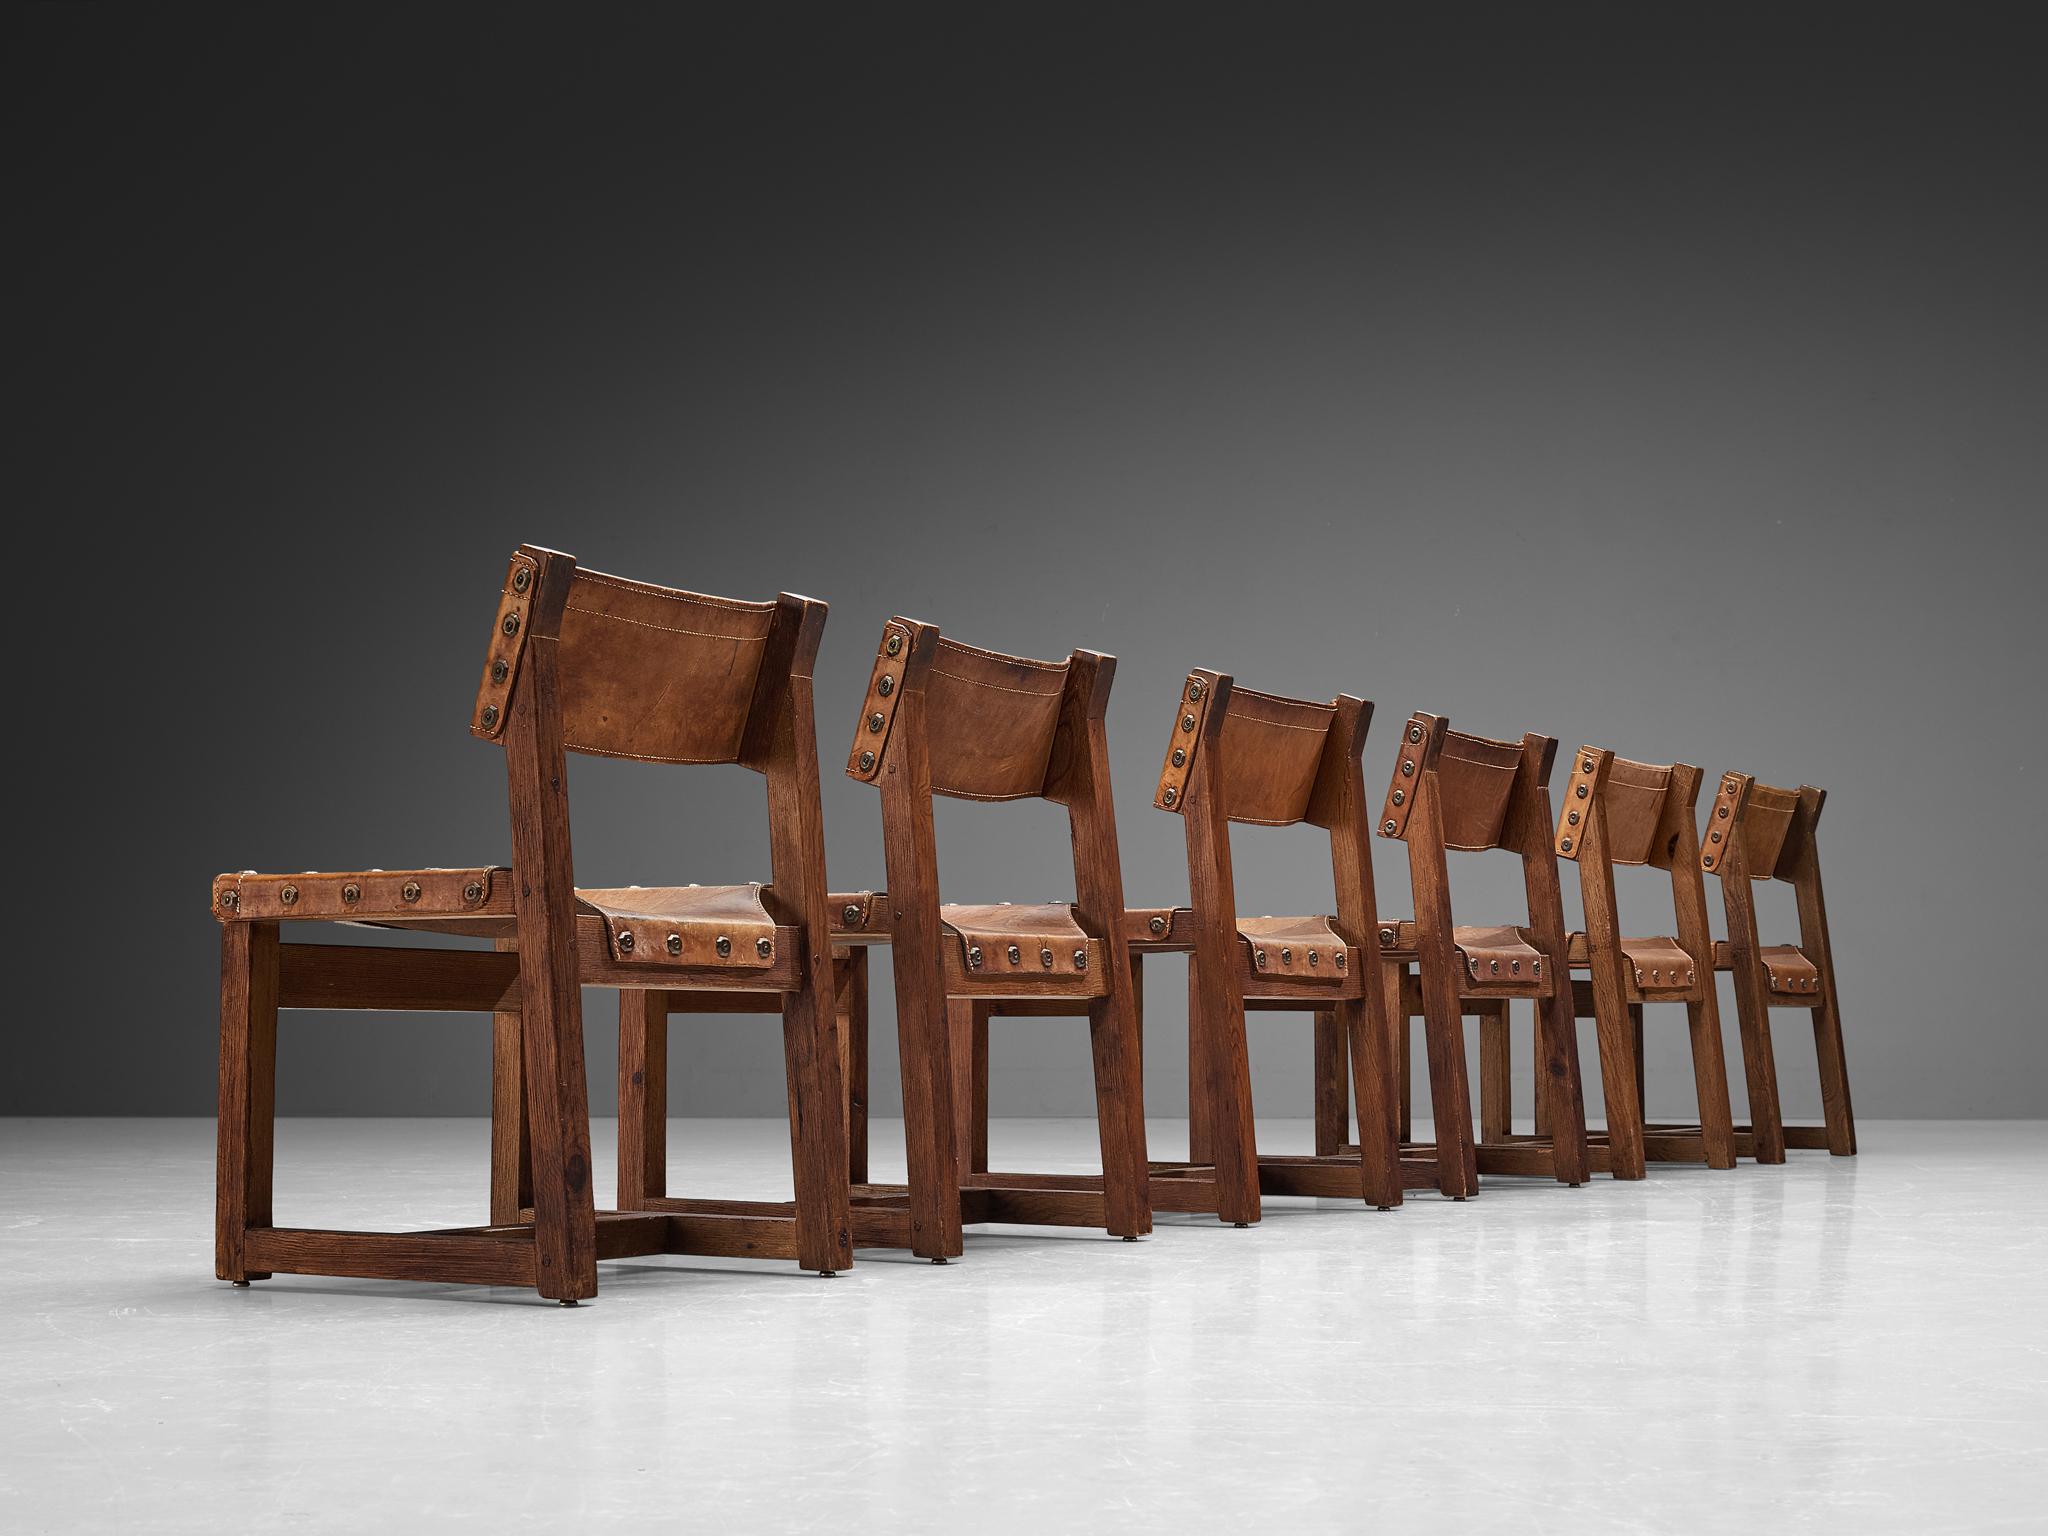 Biosca Brutalist Spanish Set of Six Dining Chairs in Cognac Leather and Pine 1